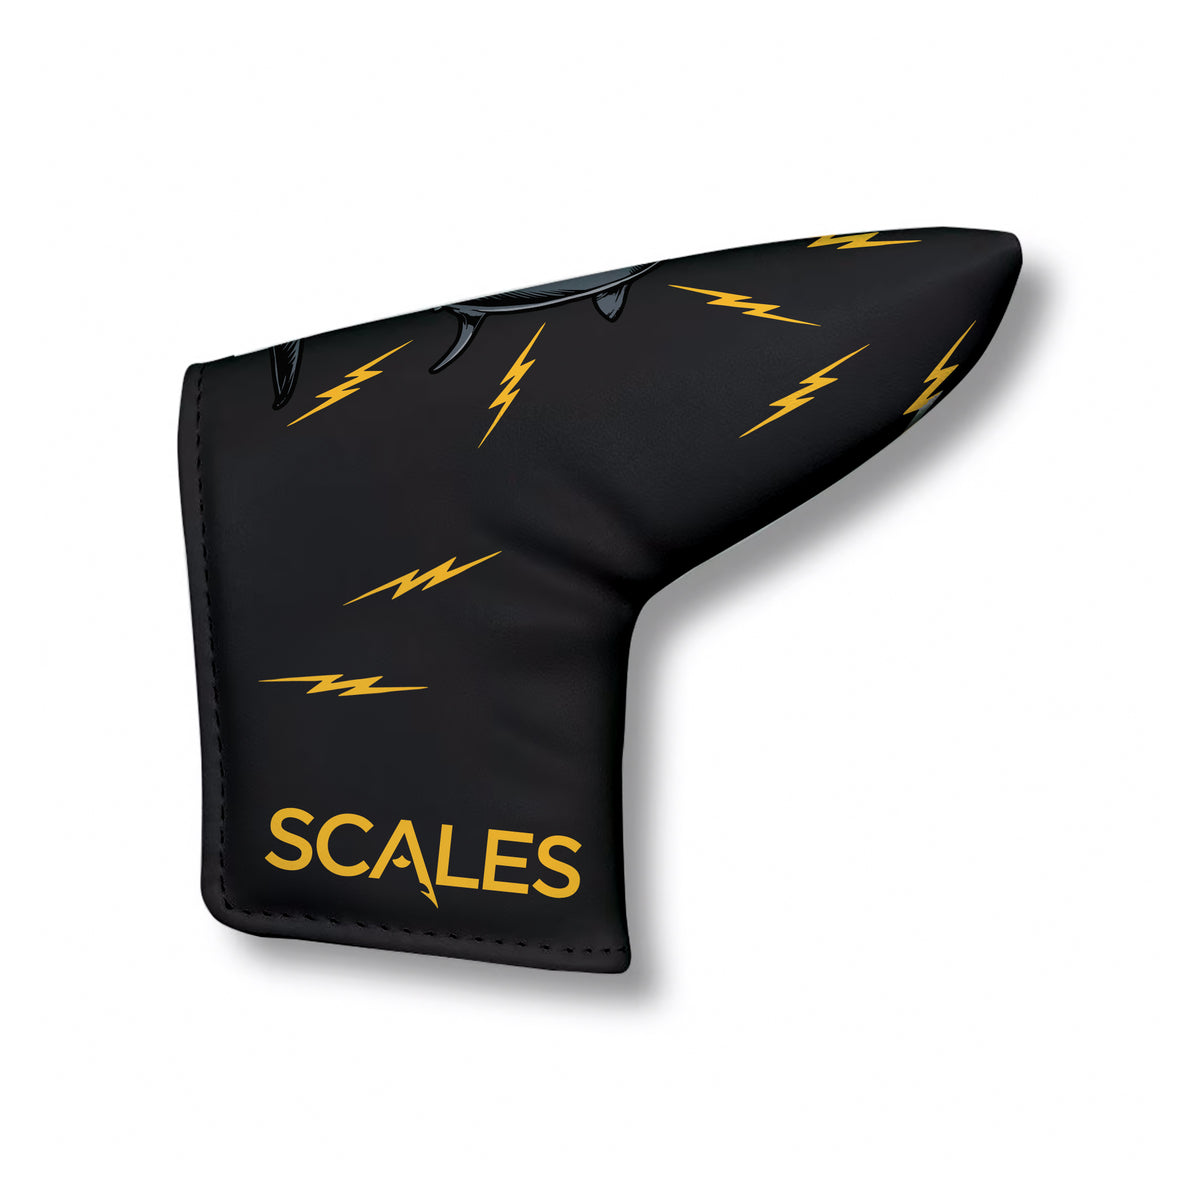 SCALES Blue Gold Blade Putter Cover - Black